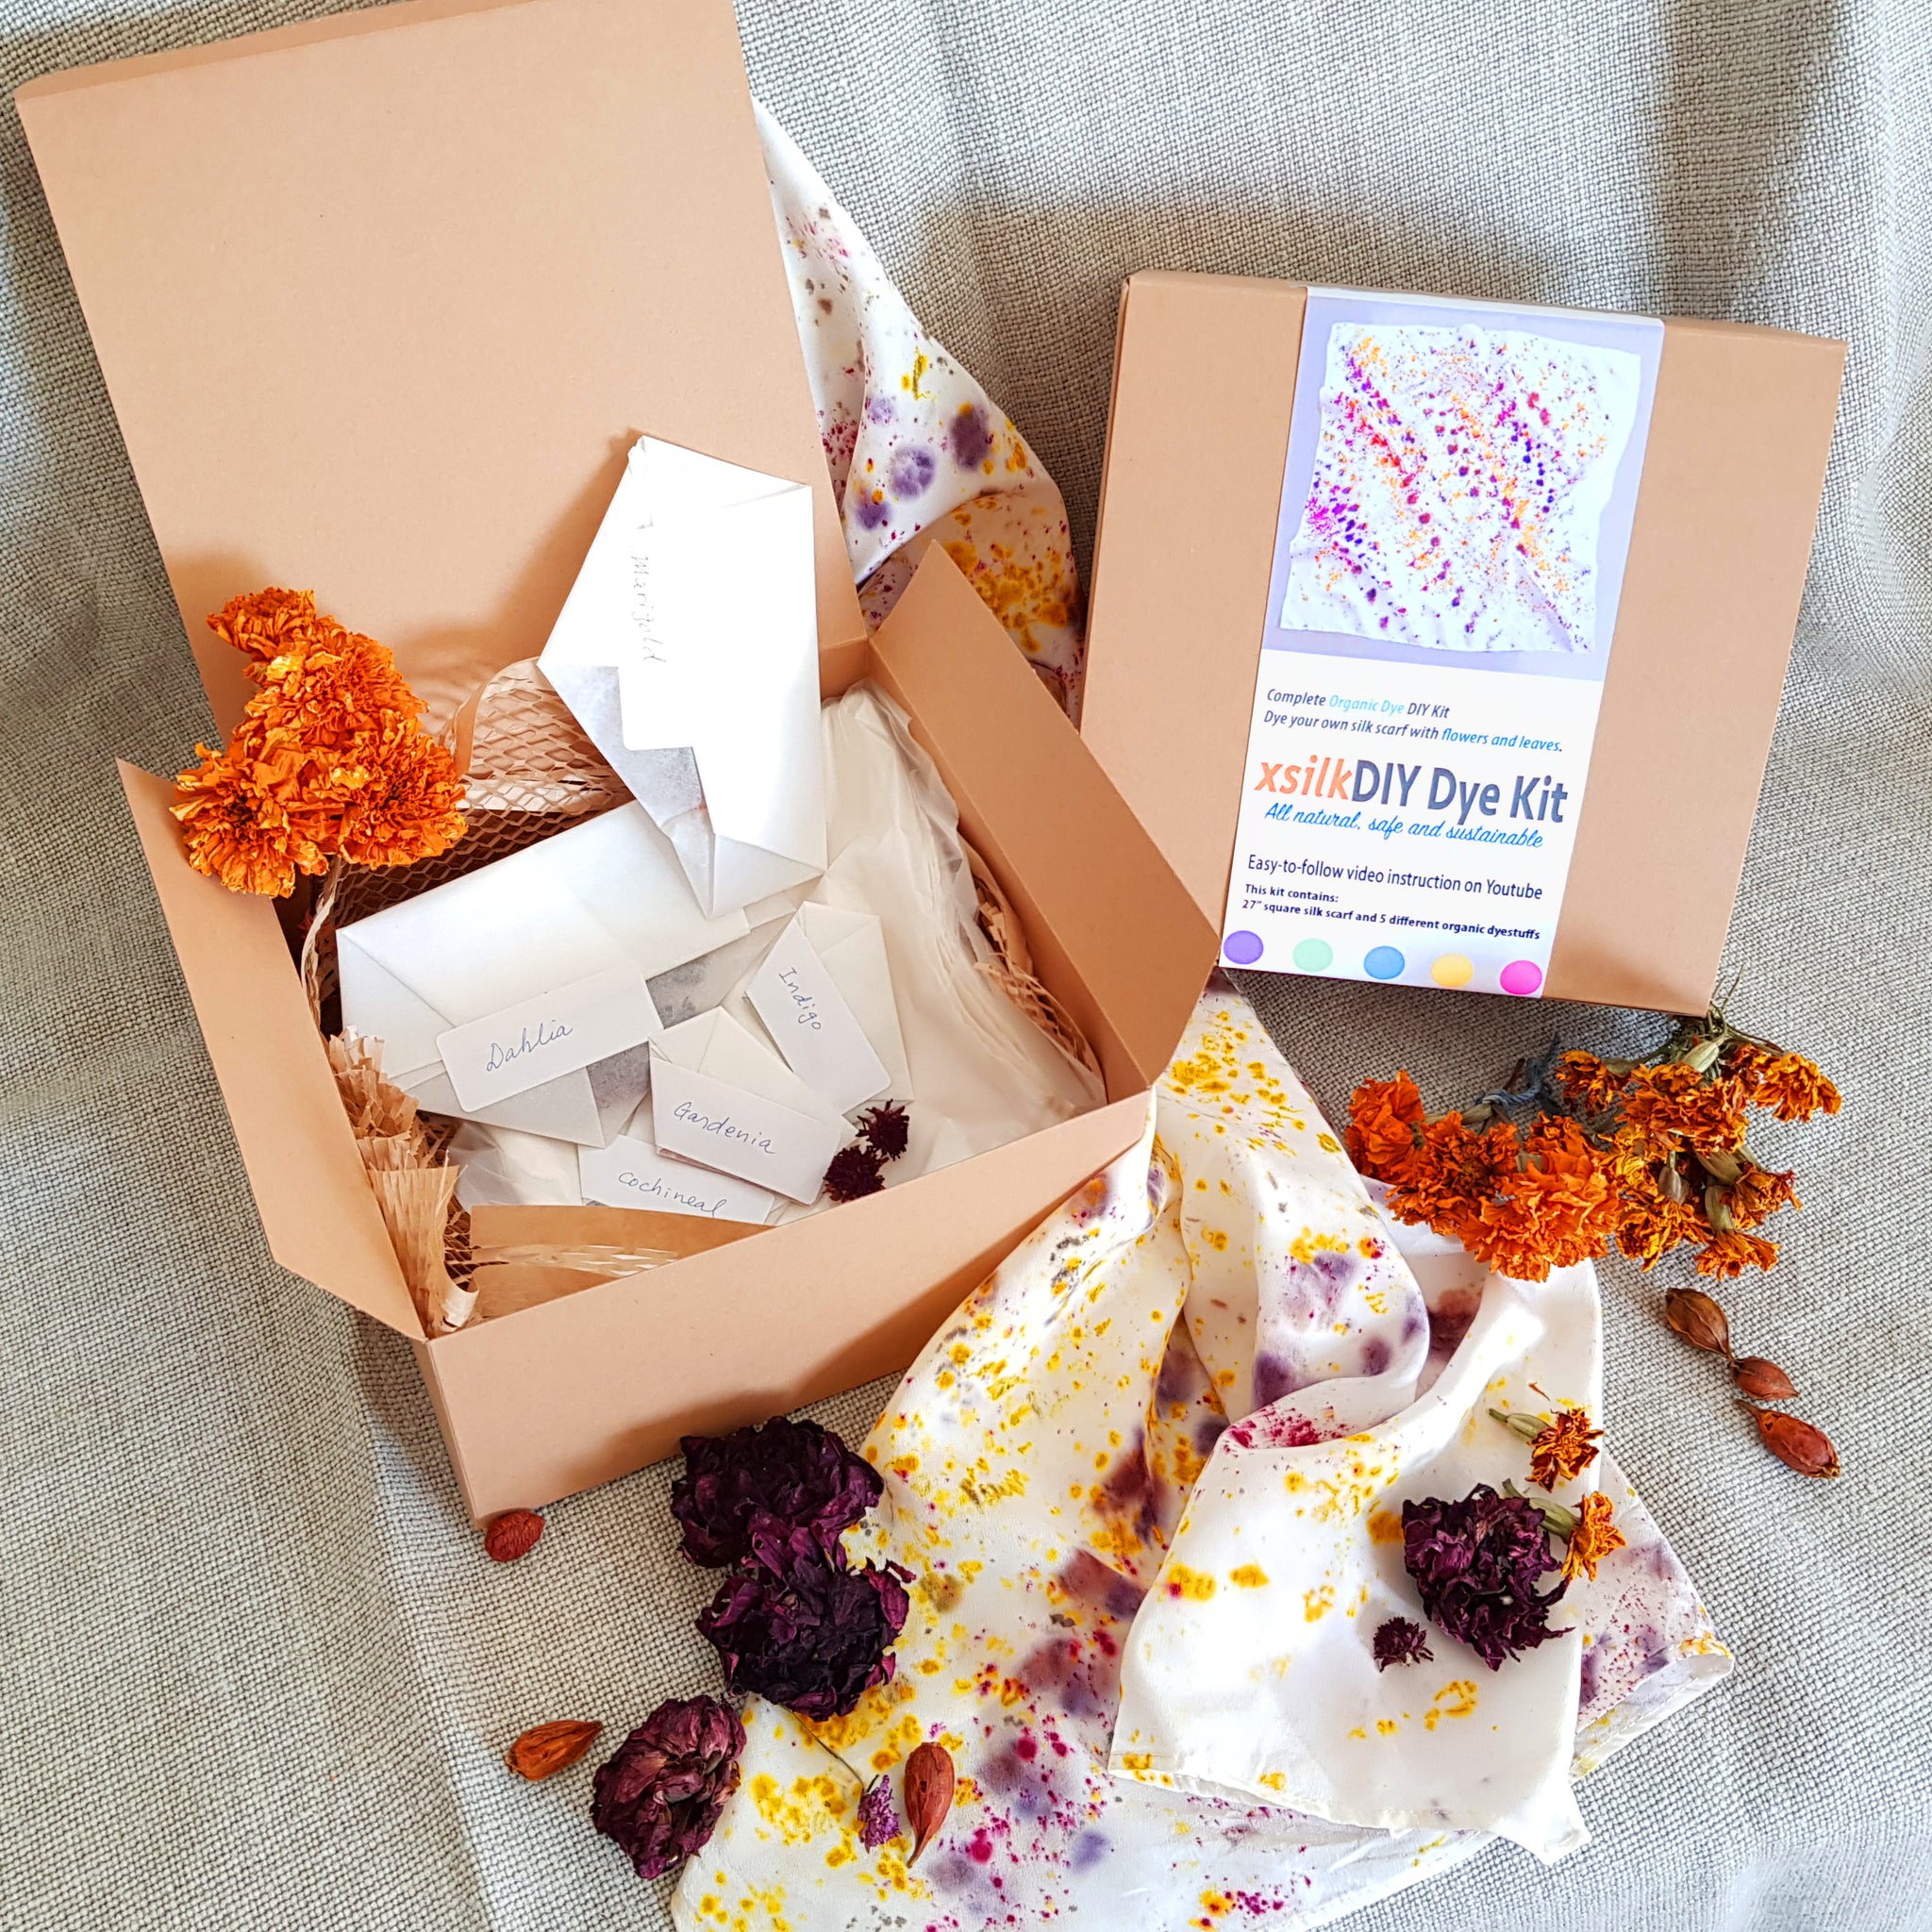 DIY Natural Dye Kit.  Silk Scarf Dye Kit with organic dyes  Great gift idea for DIYers